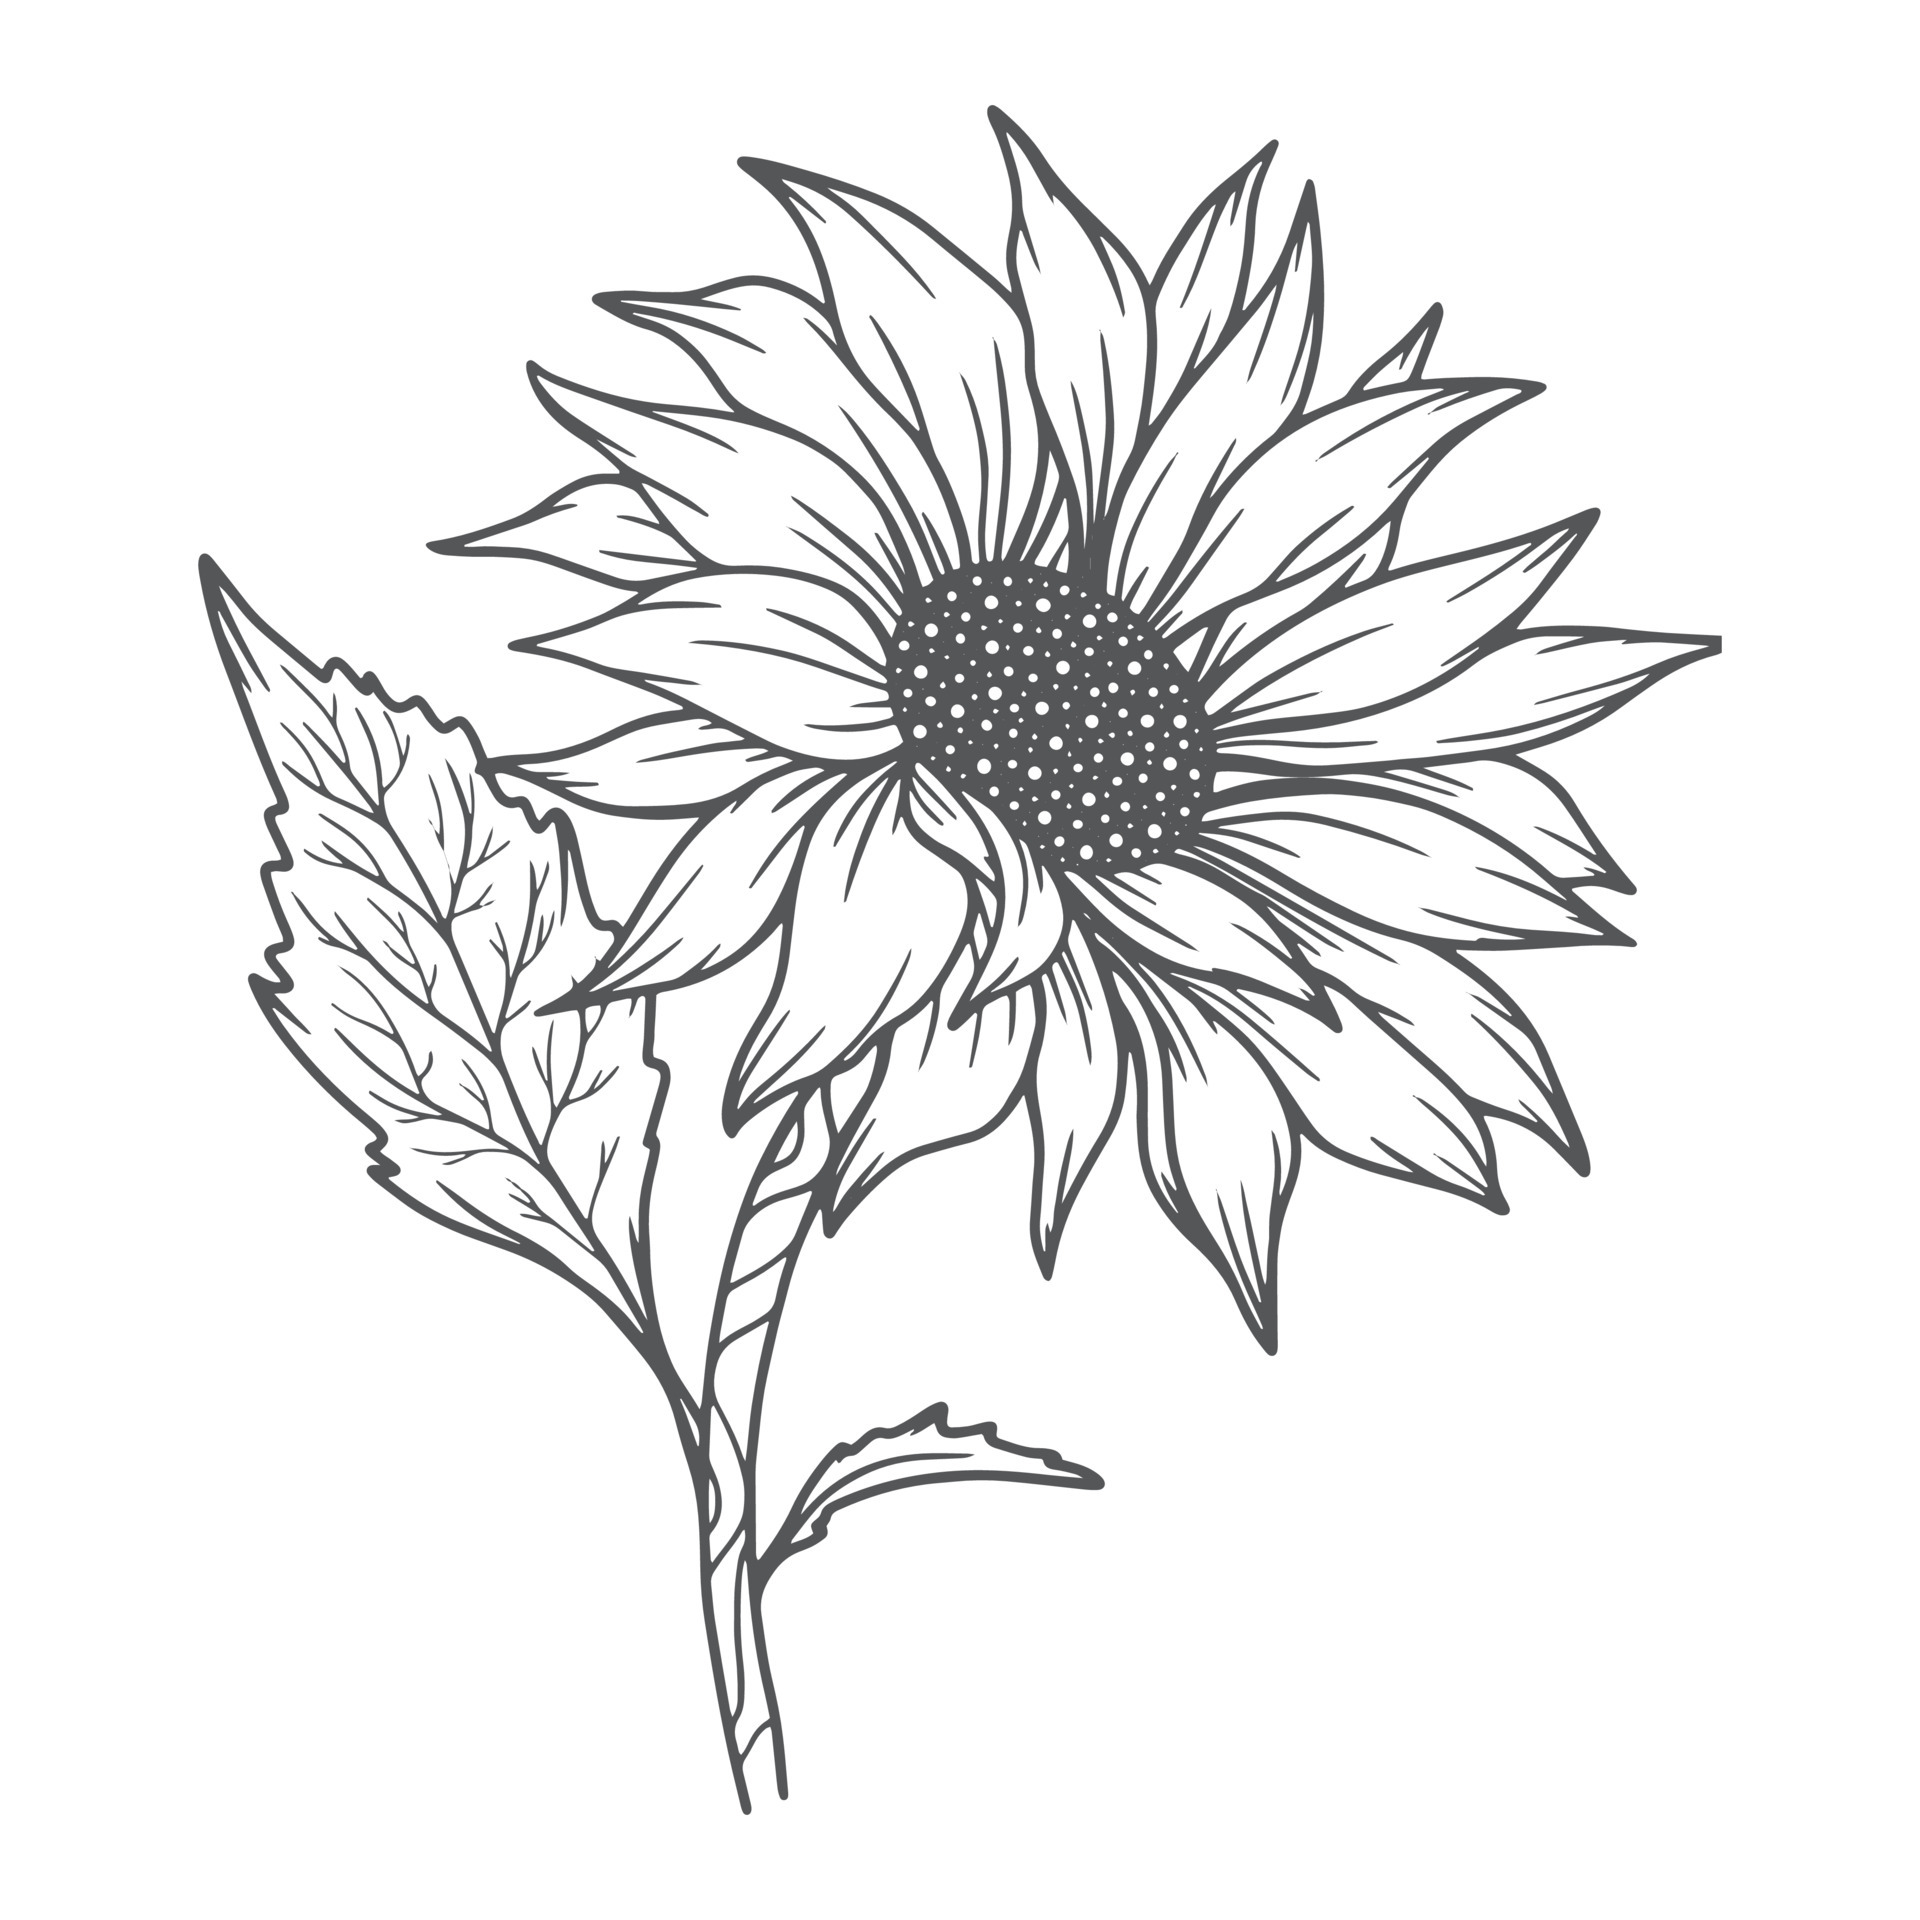 Sketch of sunflower hand drawn outline Royalty Free Vector